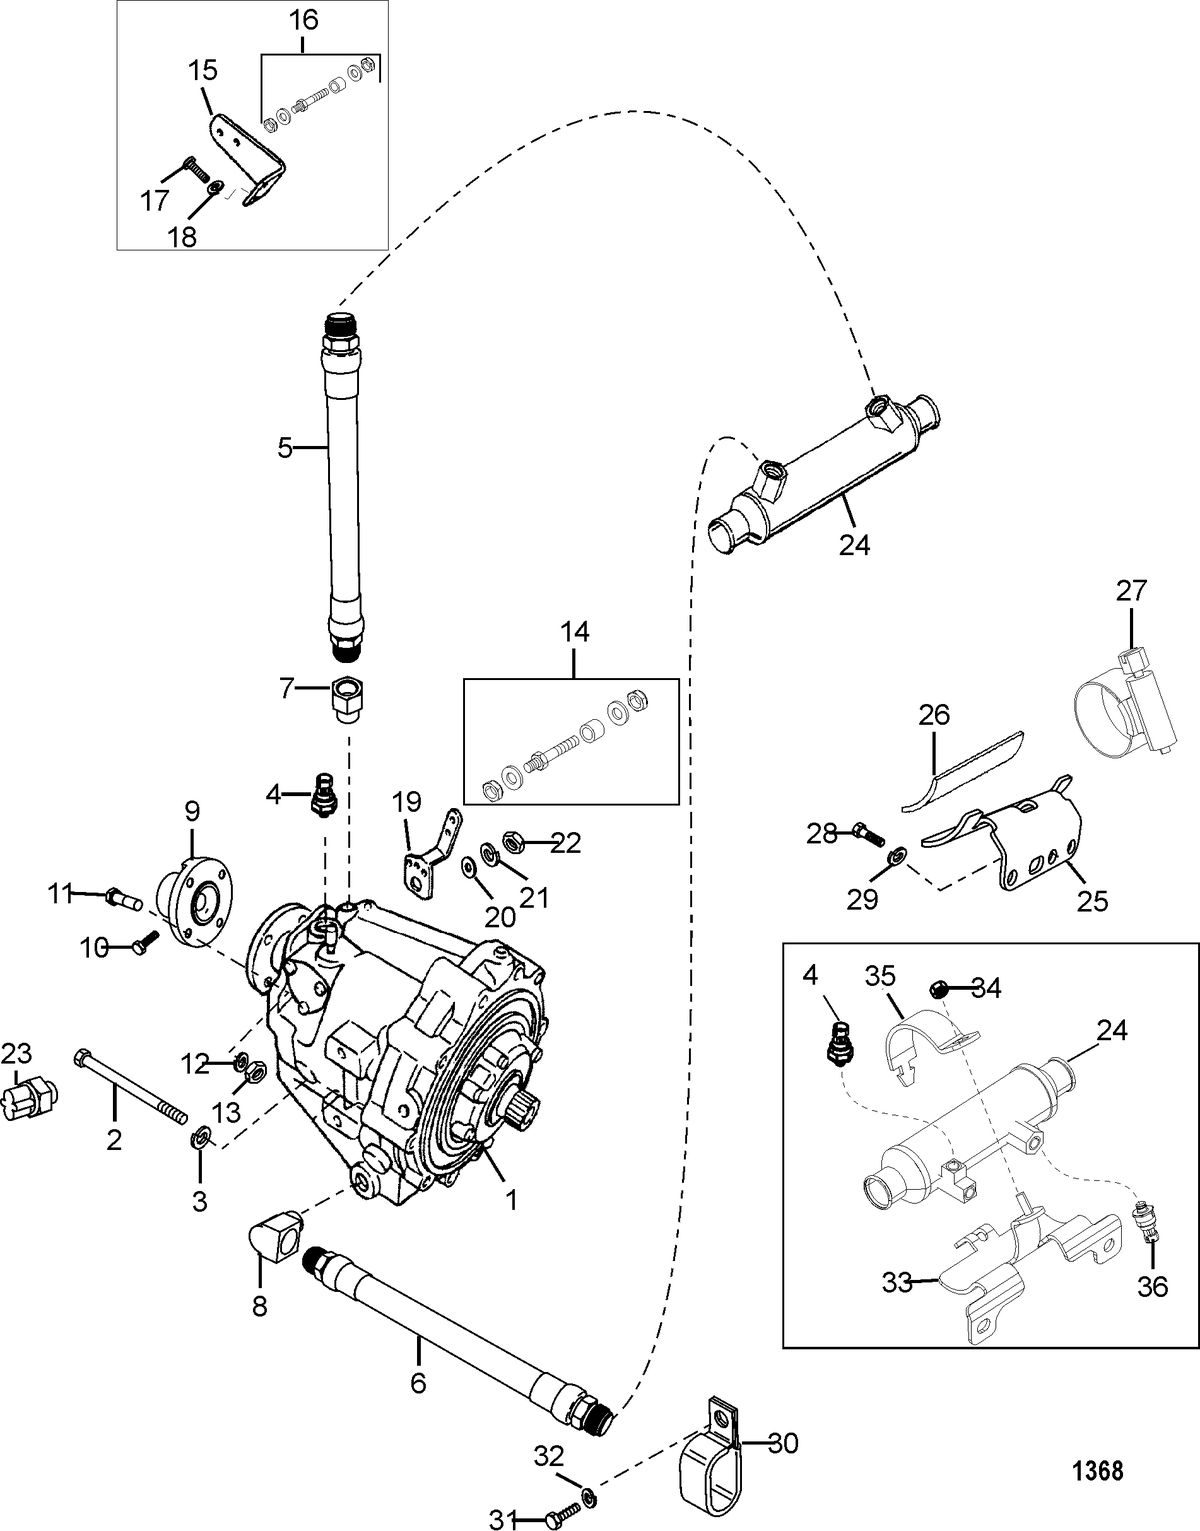 MERCRUISER 350 MAG MPI MX 6.2L MPI INBOARD Transmission And Related Parts(Borg-Warner 71C And 72C)